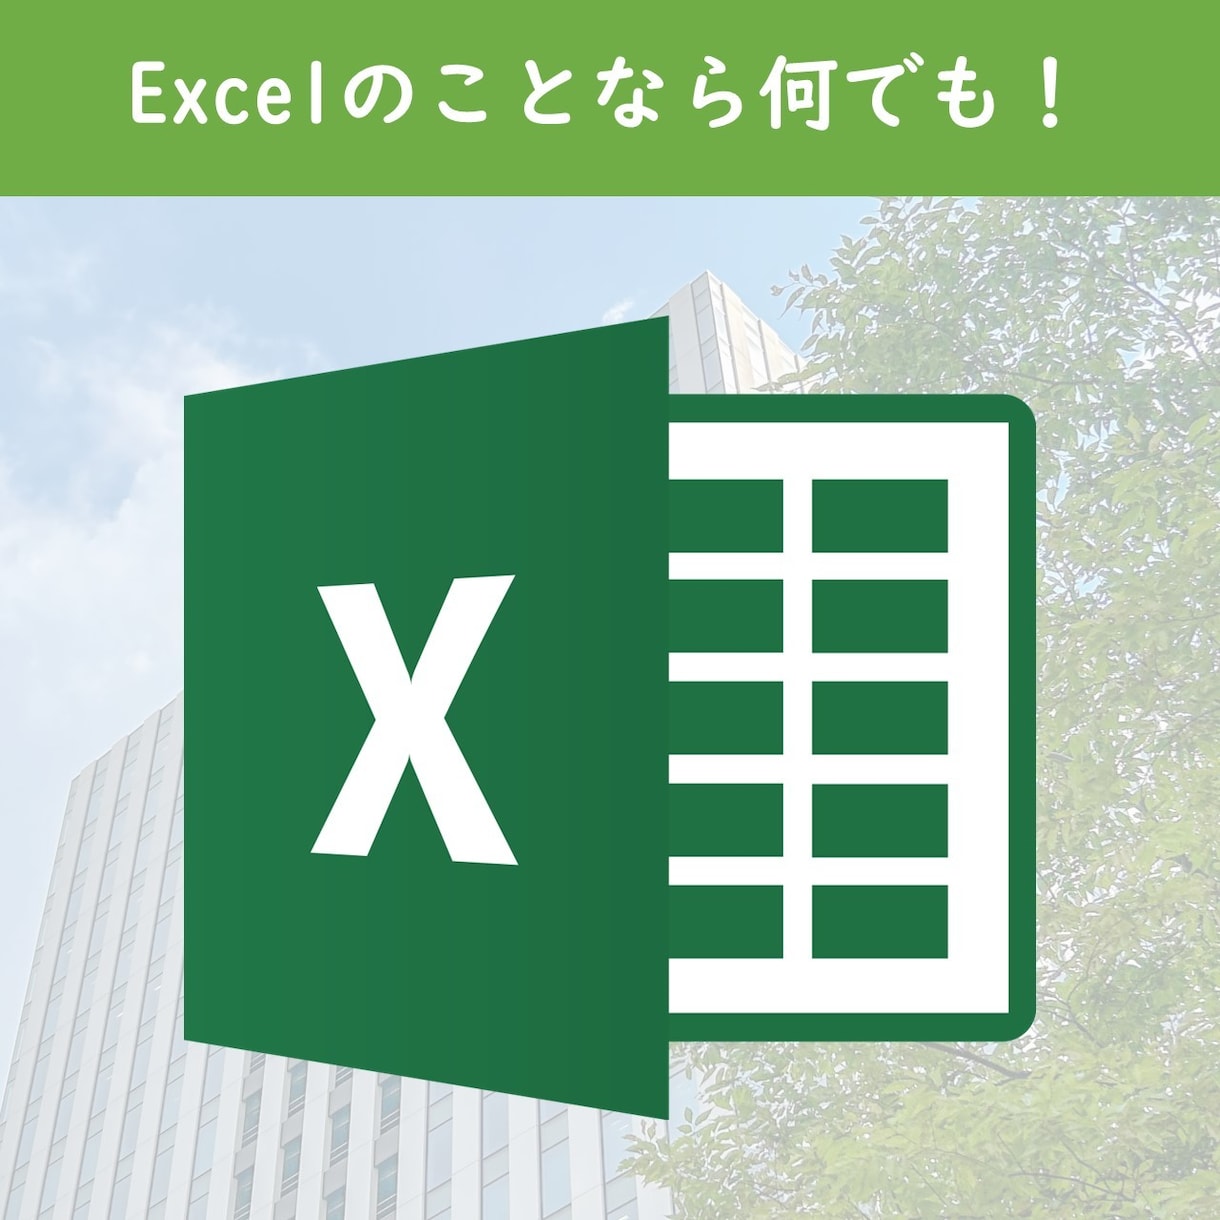 💬Coconara｜Excel/We will consult with you about anything related to Excel.
               "Fugee"
                –
  …